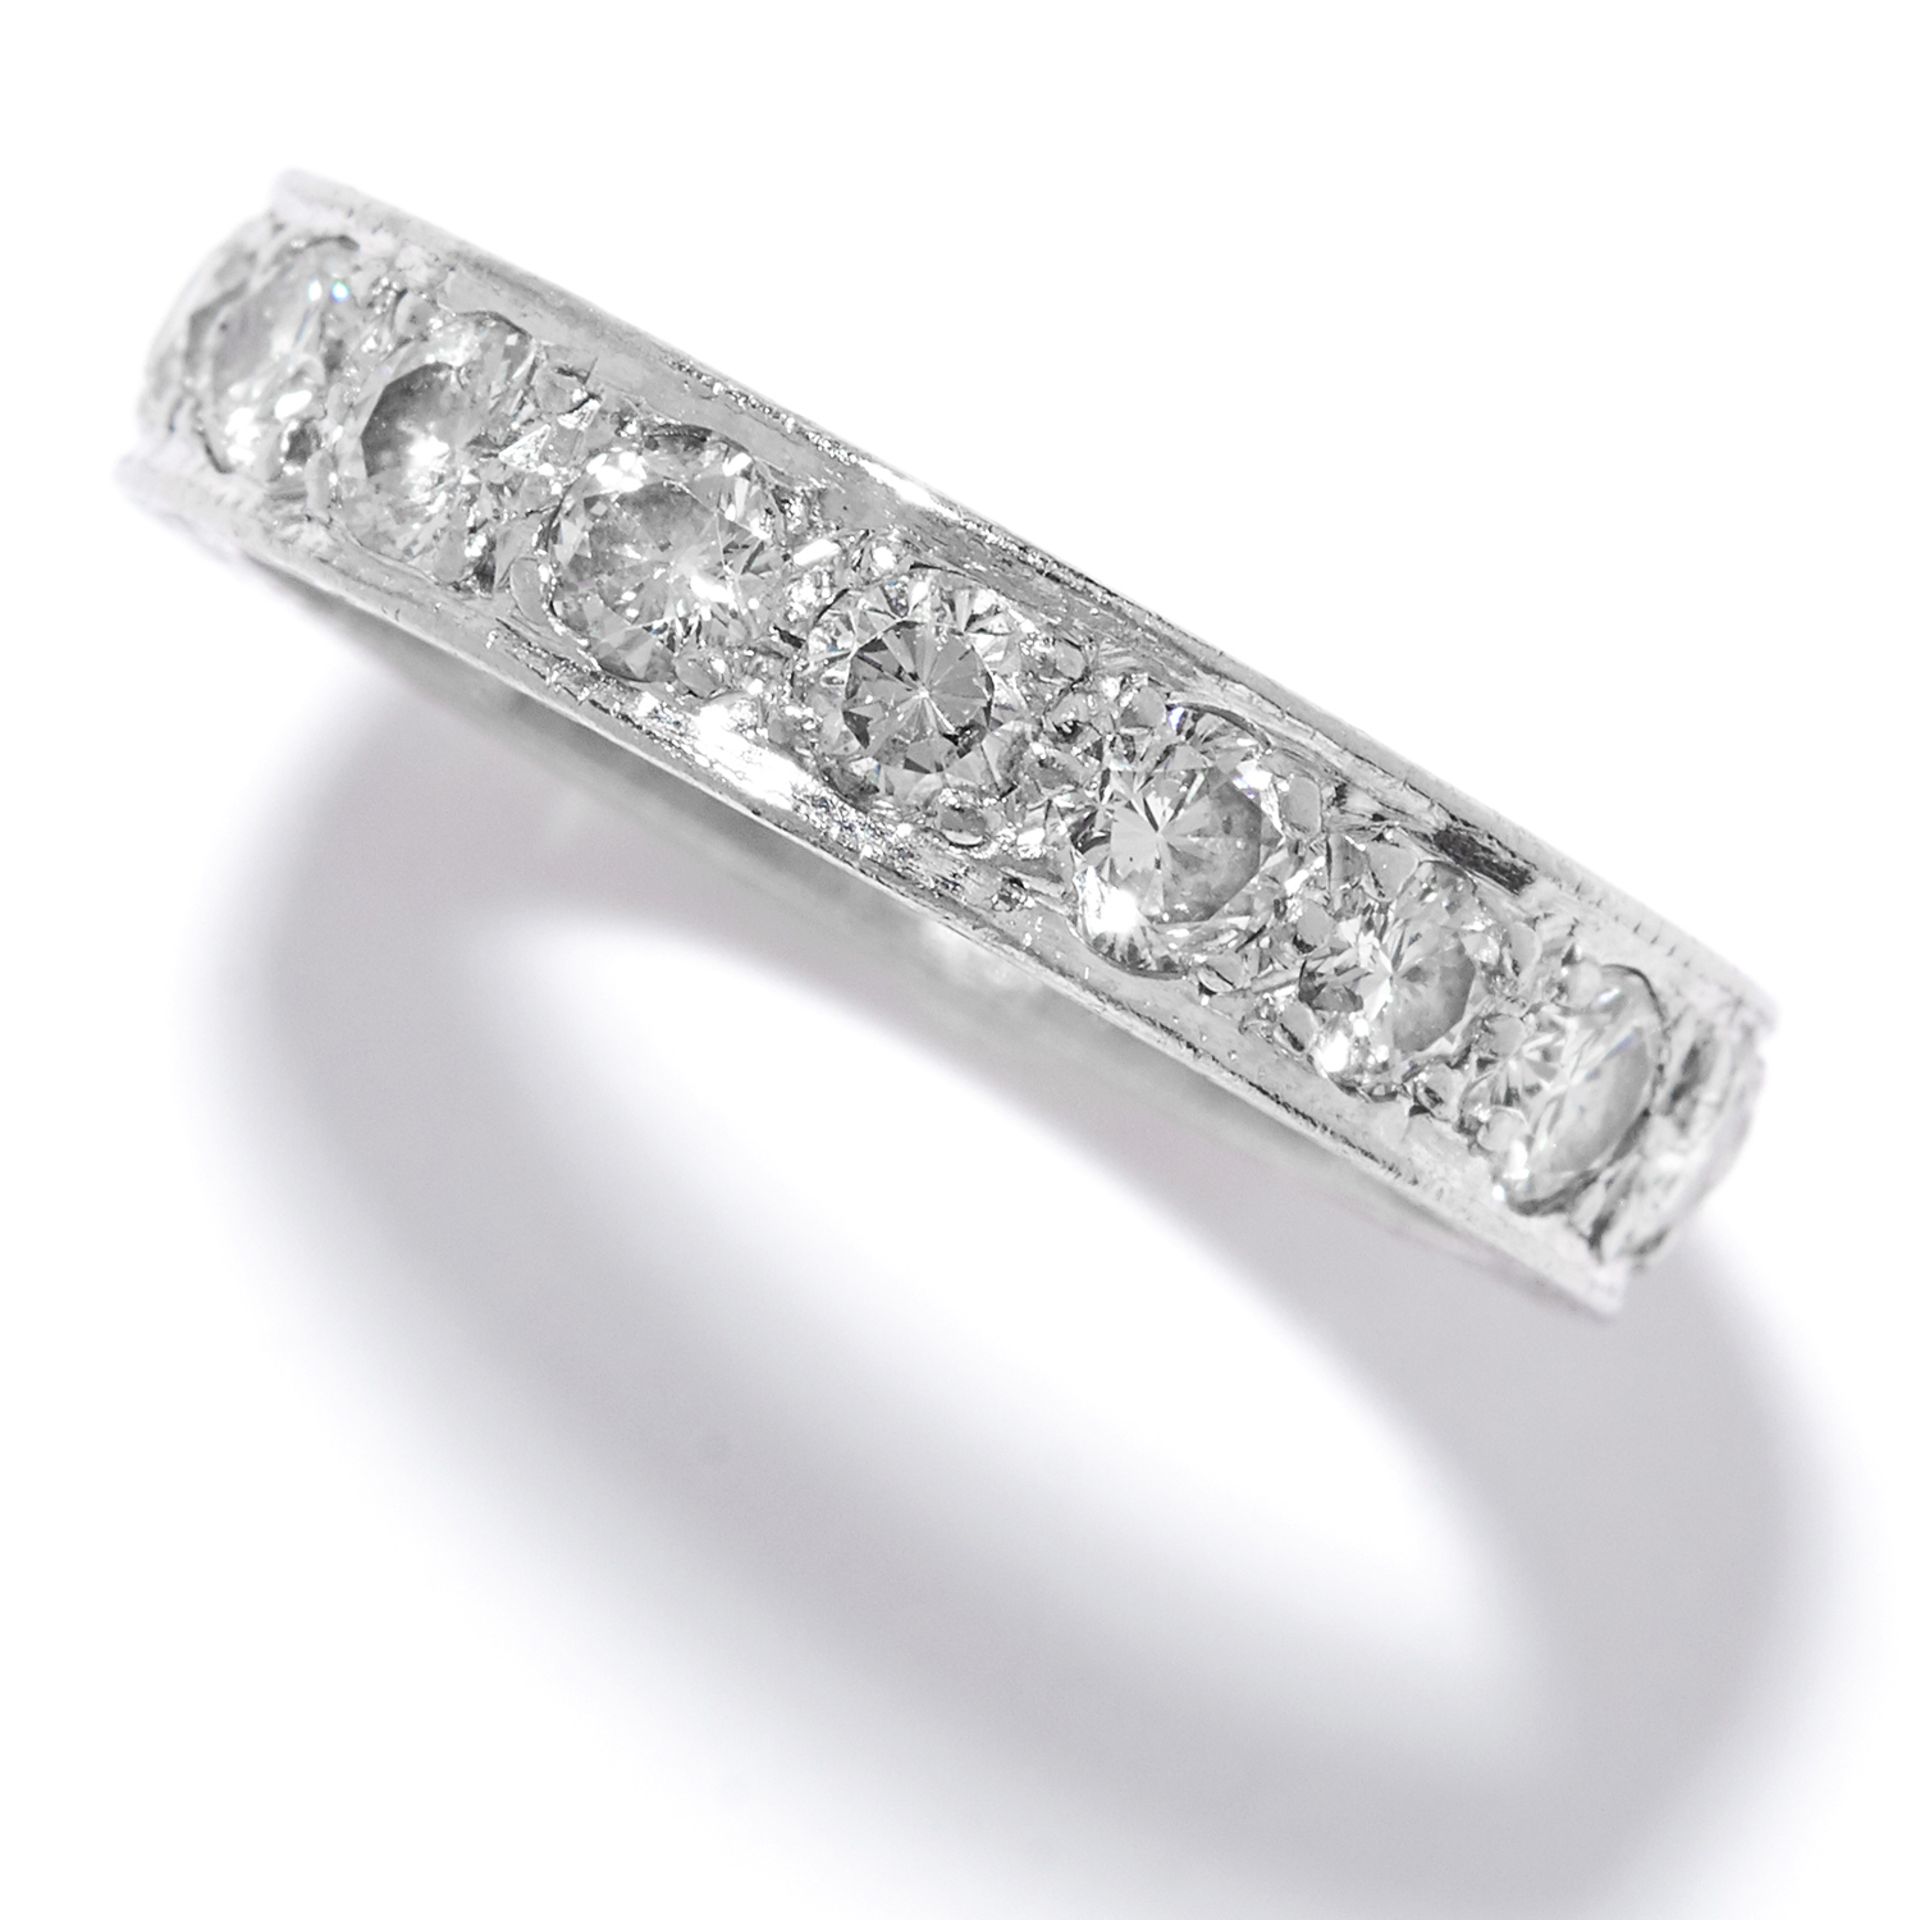 A 1.50 CARAT DIAMOND ETERNITY RING in platinum or white gold, set with a single row of round cut